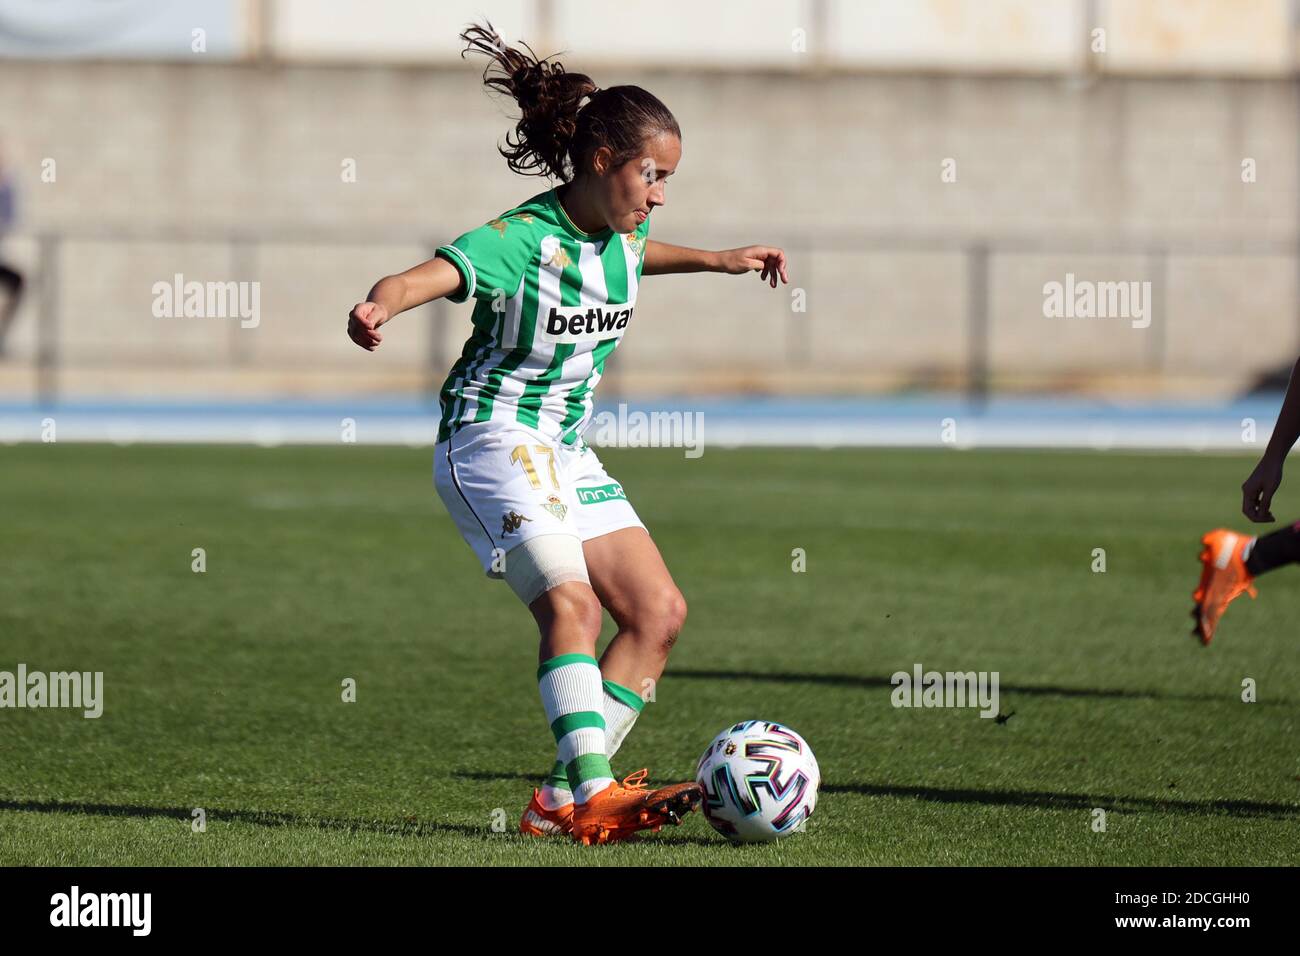 Sevilla, Spain. 21st Nov, 2020. Rosa Marquez of Real Betis in action during  the Primera Iberdrola match between Real Betis and Real Madrid at Ciudad  Deportiva Luis del Sol in Sevilla, Spain.